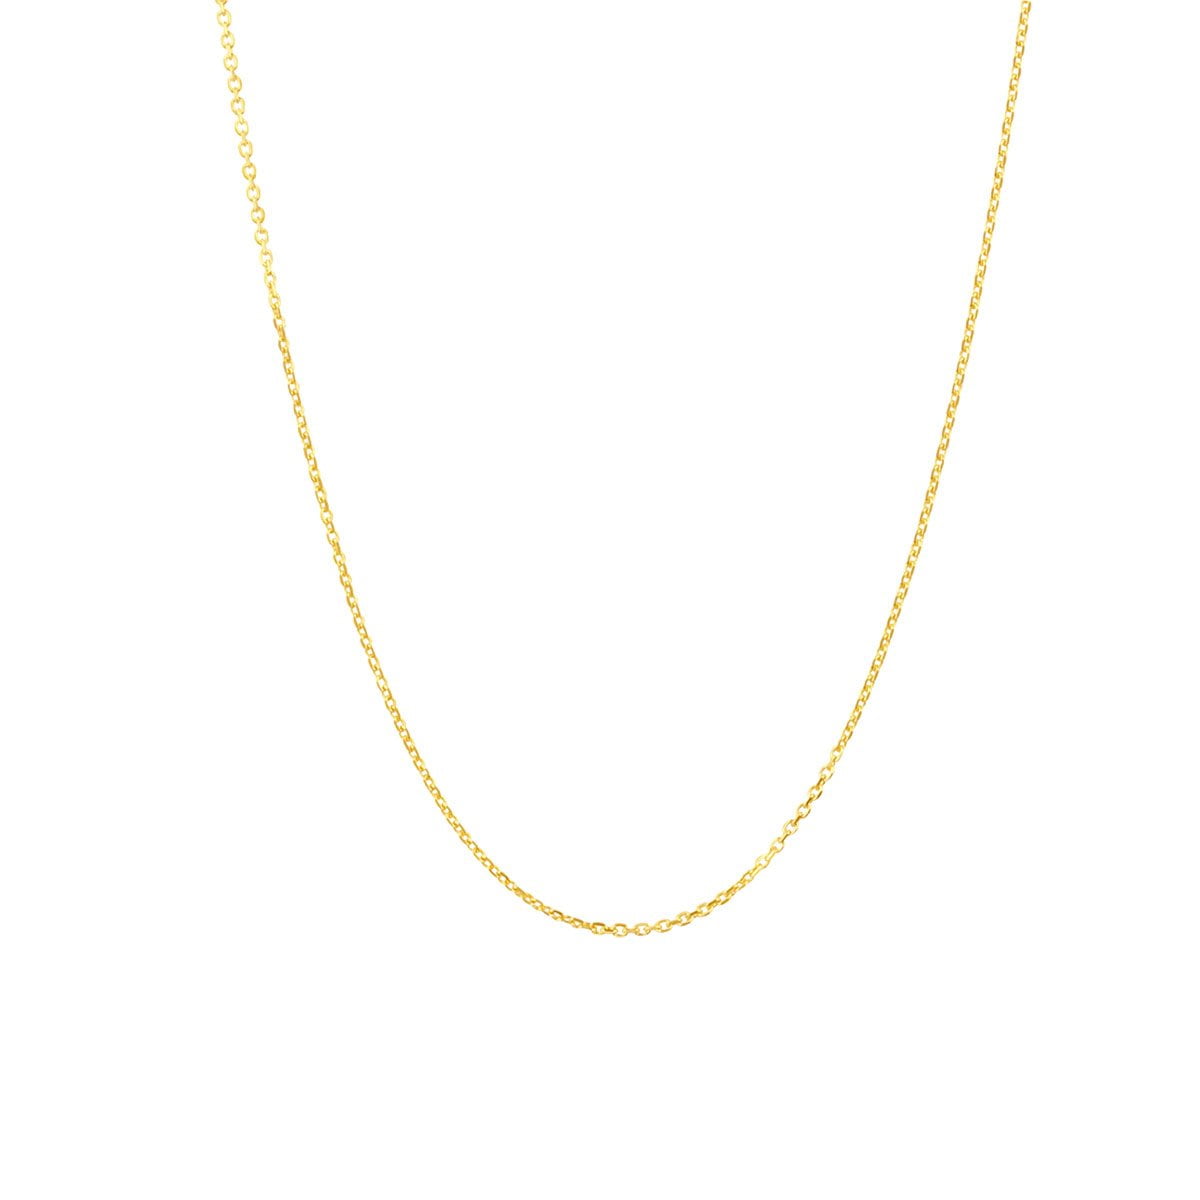 18ct Yellow Gold 18inch Trace Chain Necklace